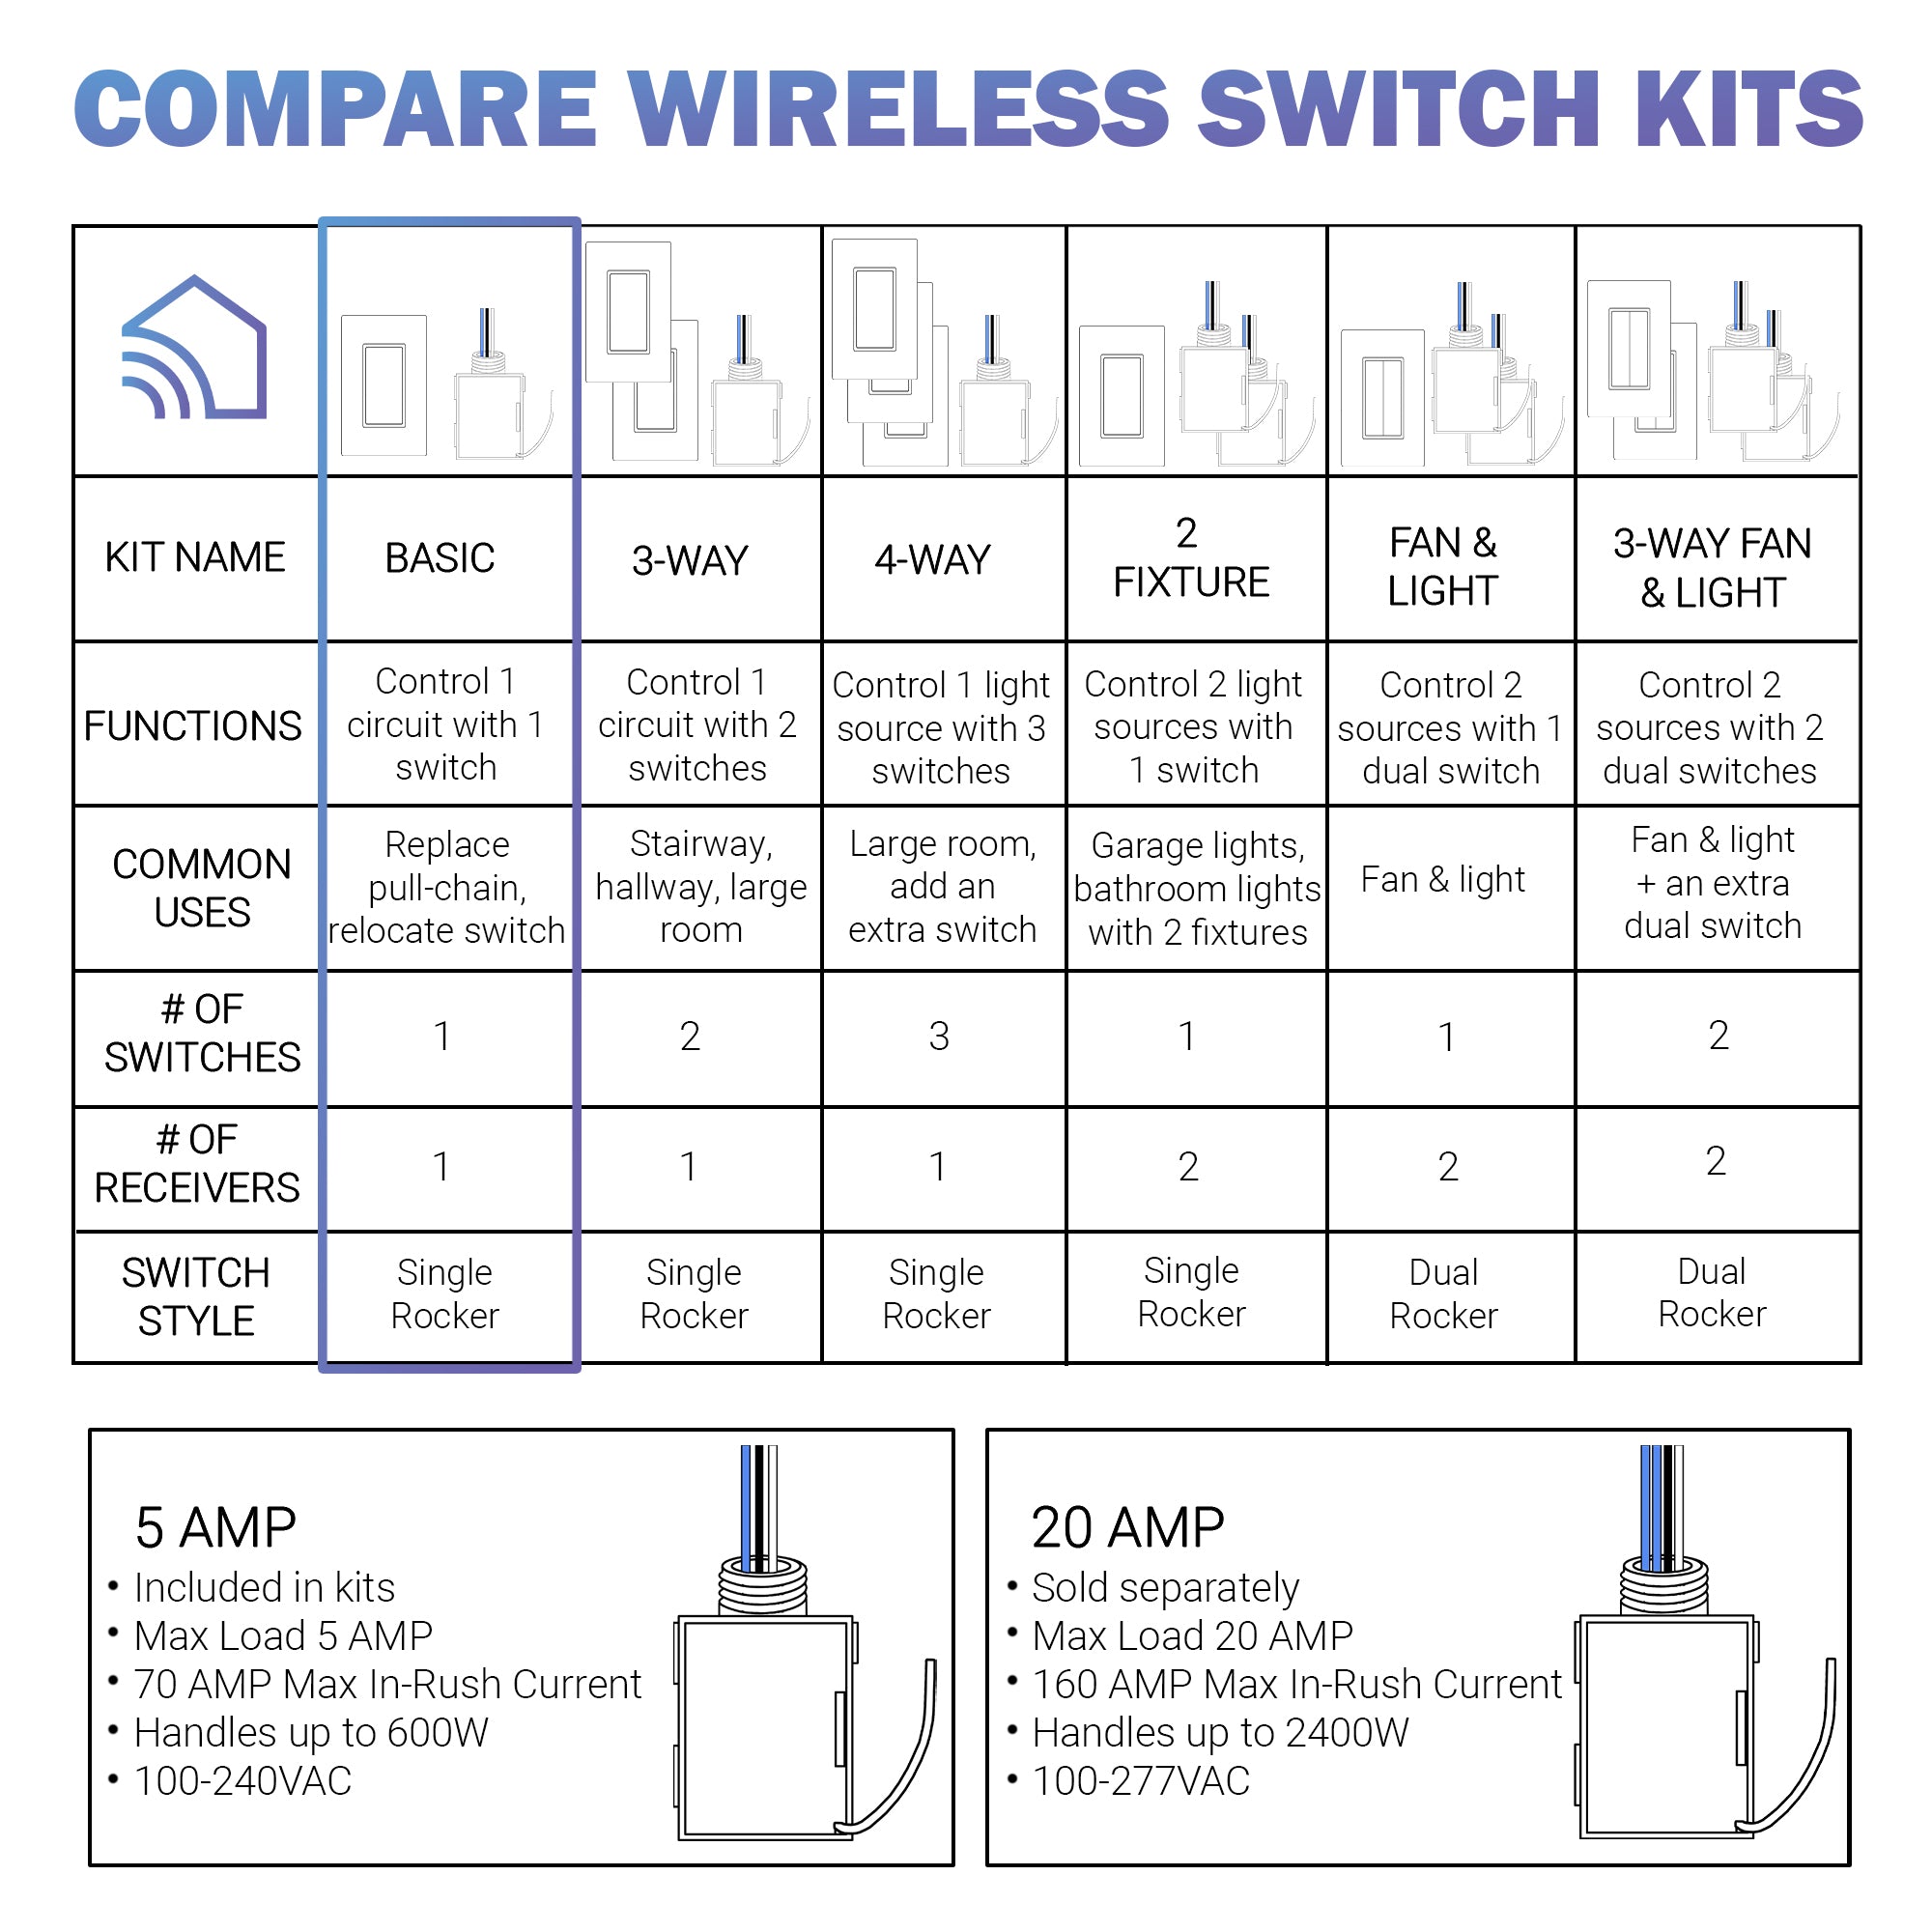 Difference Between Wired, Wireless, and Wire-Free Light Switches